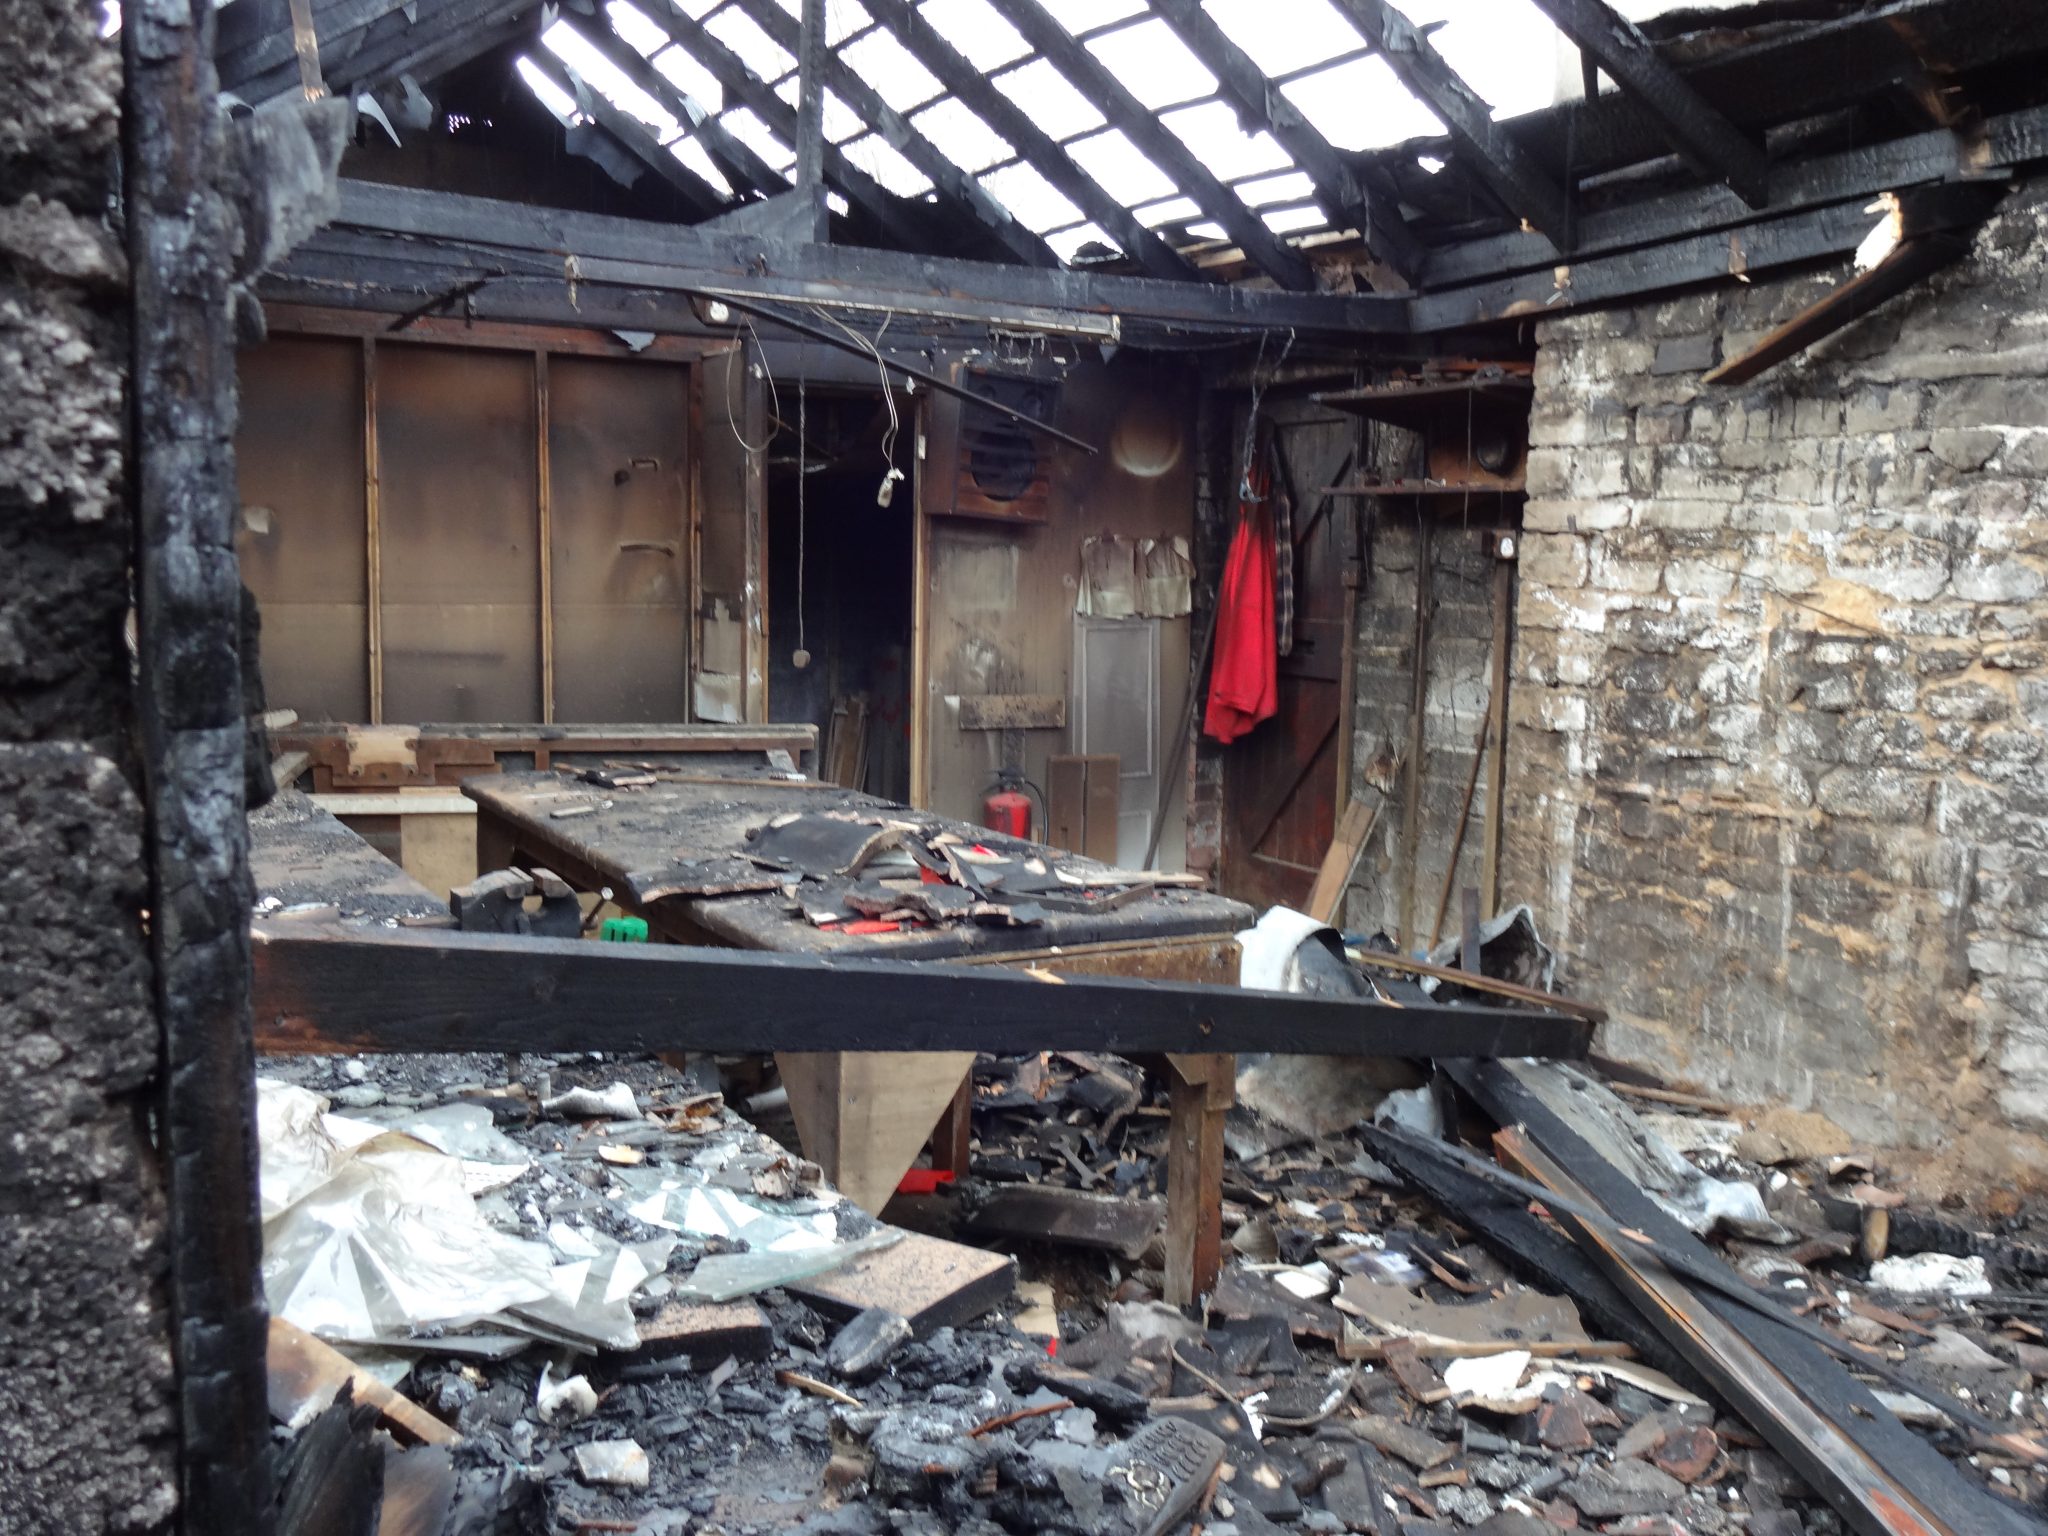 Fire Damaged Property for Demolition by AA Groundworks of Bath